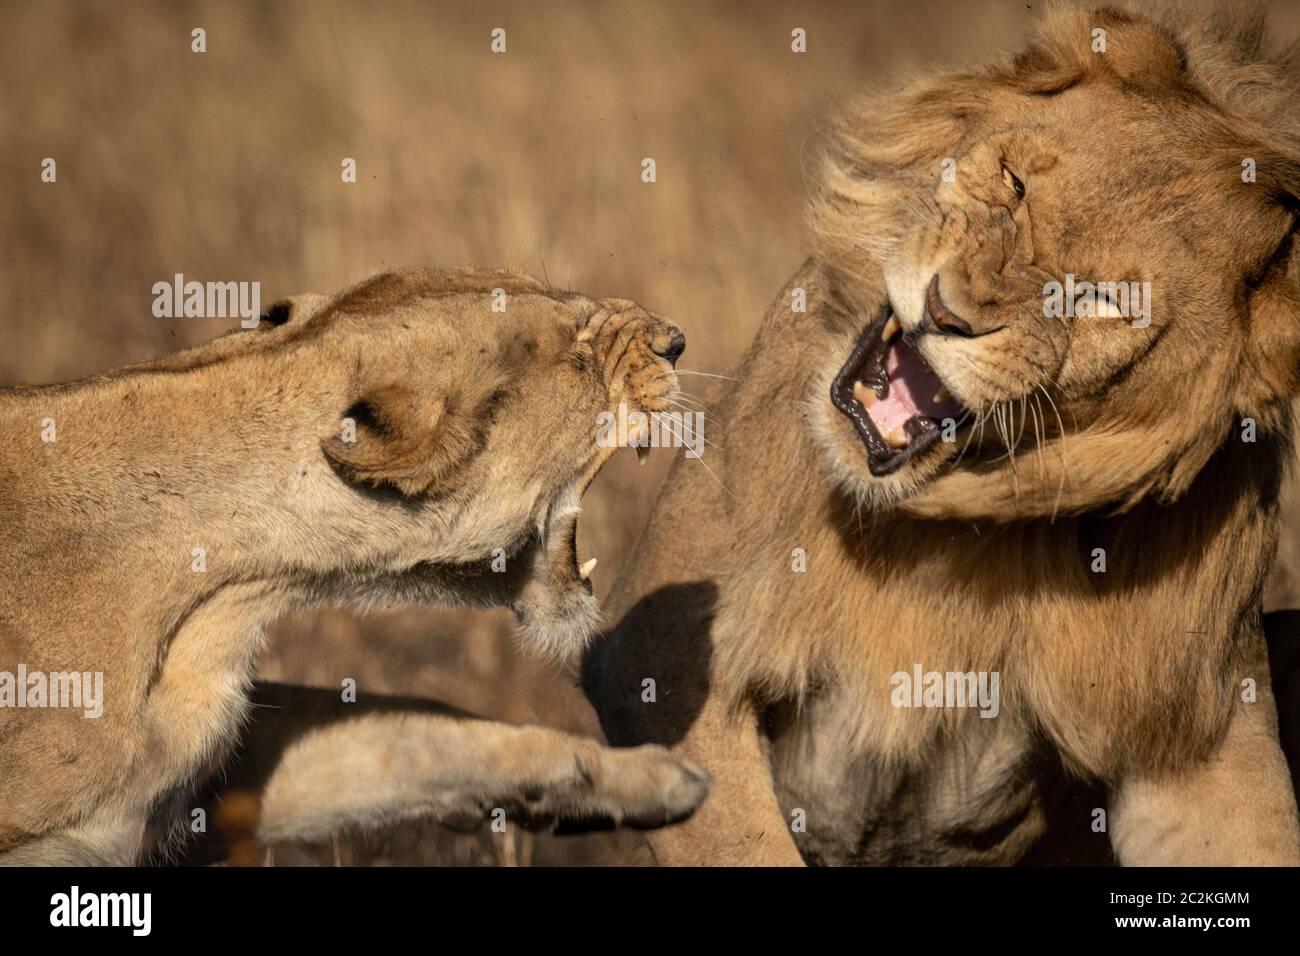 Close-up of lions growling at each other Stock Photo